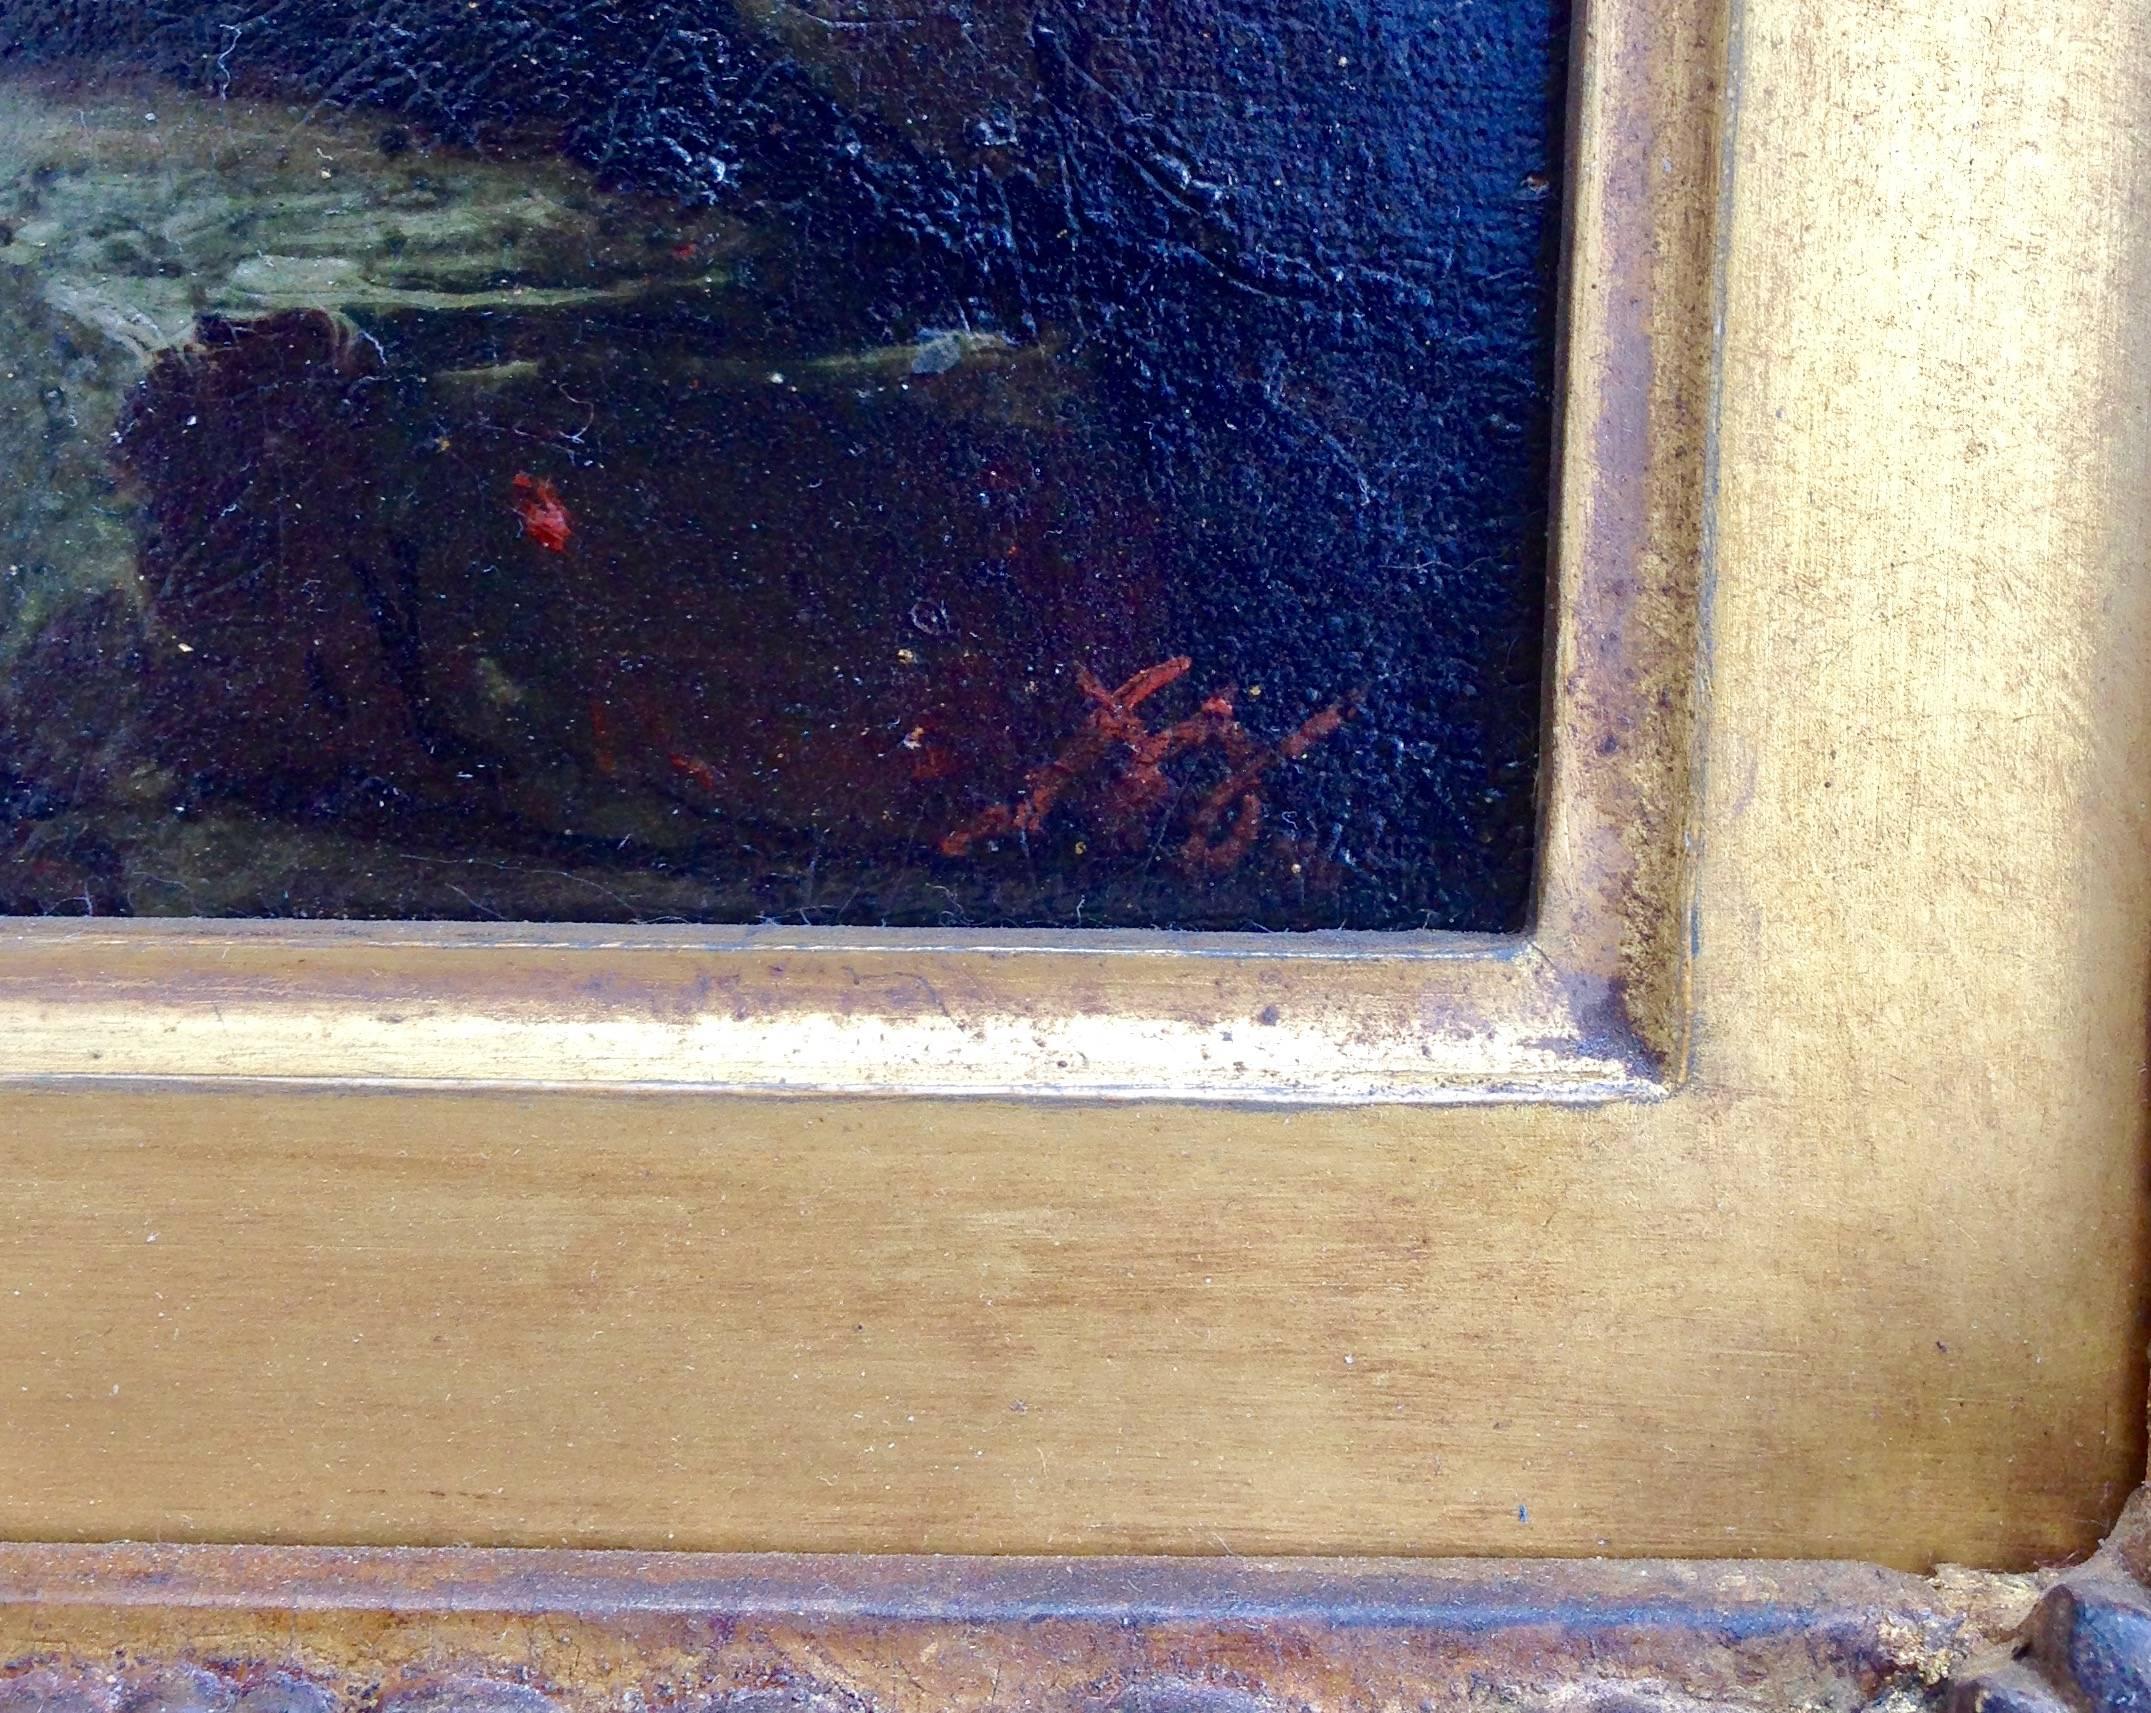 Monogramed on the front lower left and titled and dated on the back. Most likely the original frame. 

John Williamson (1826–1885)
John Williamson was a versatile artist who created still lifes, genre scenes, and landscapes during the heyday of